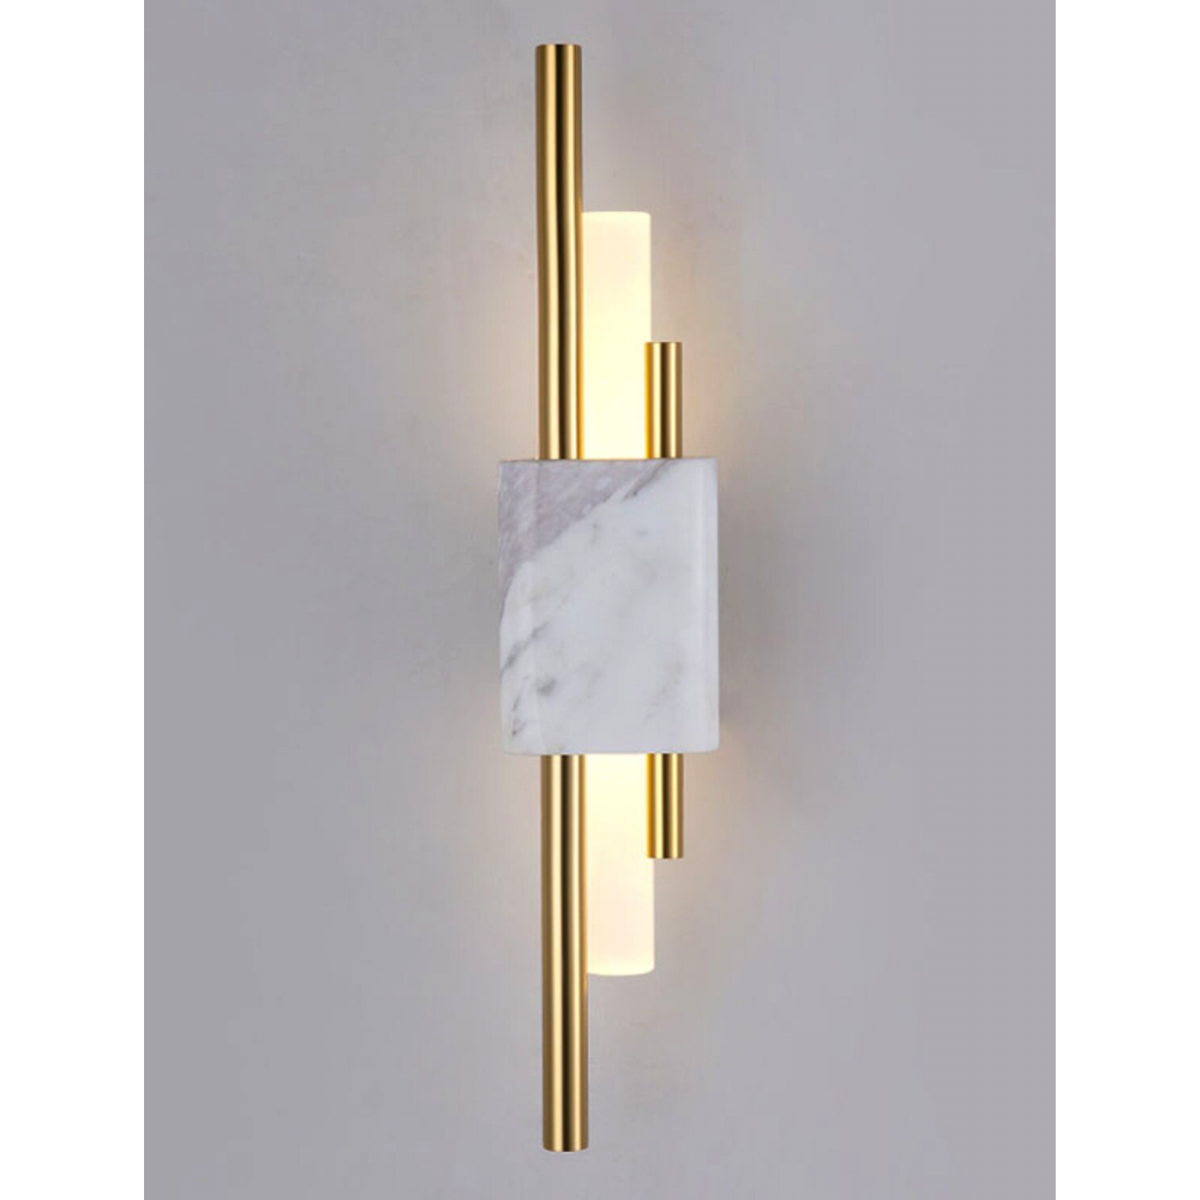 NORDIC TORCH WALL LIGHT